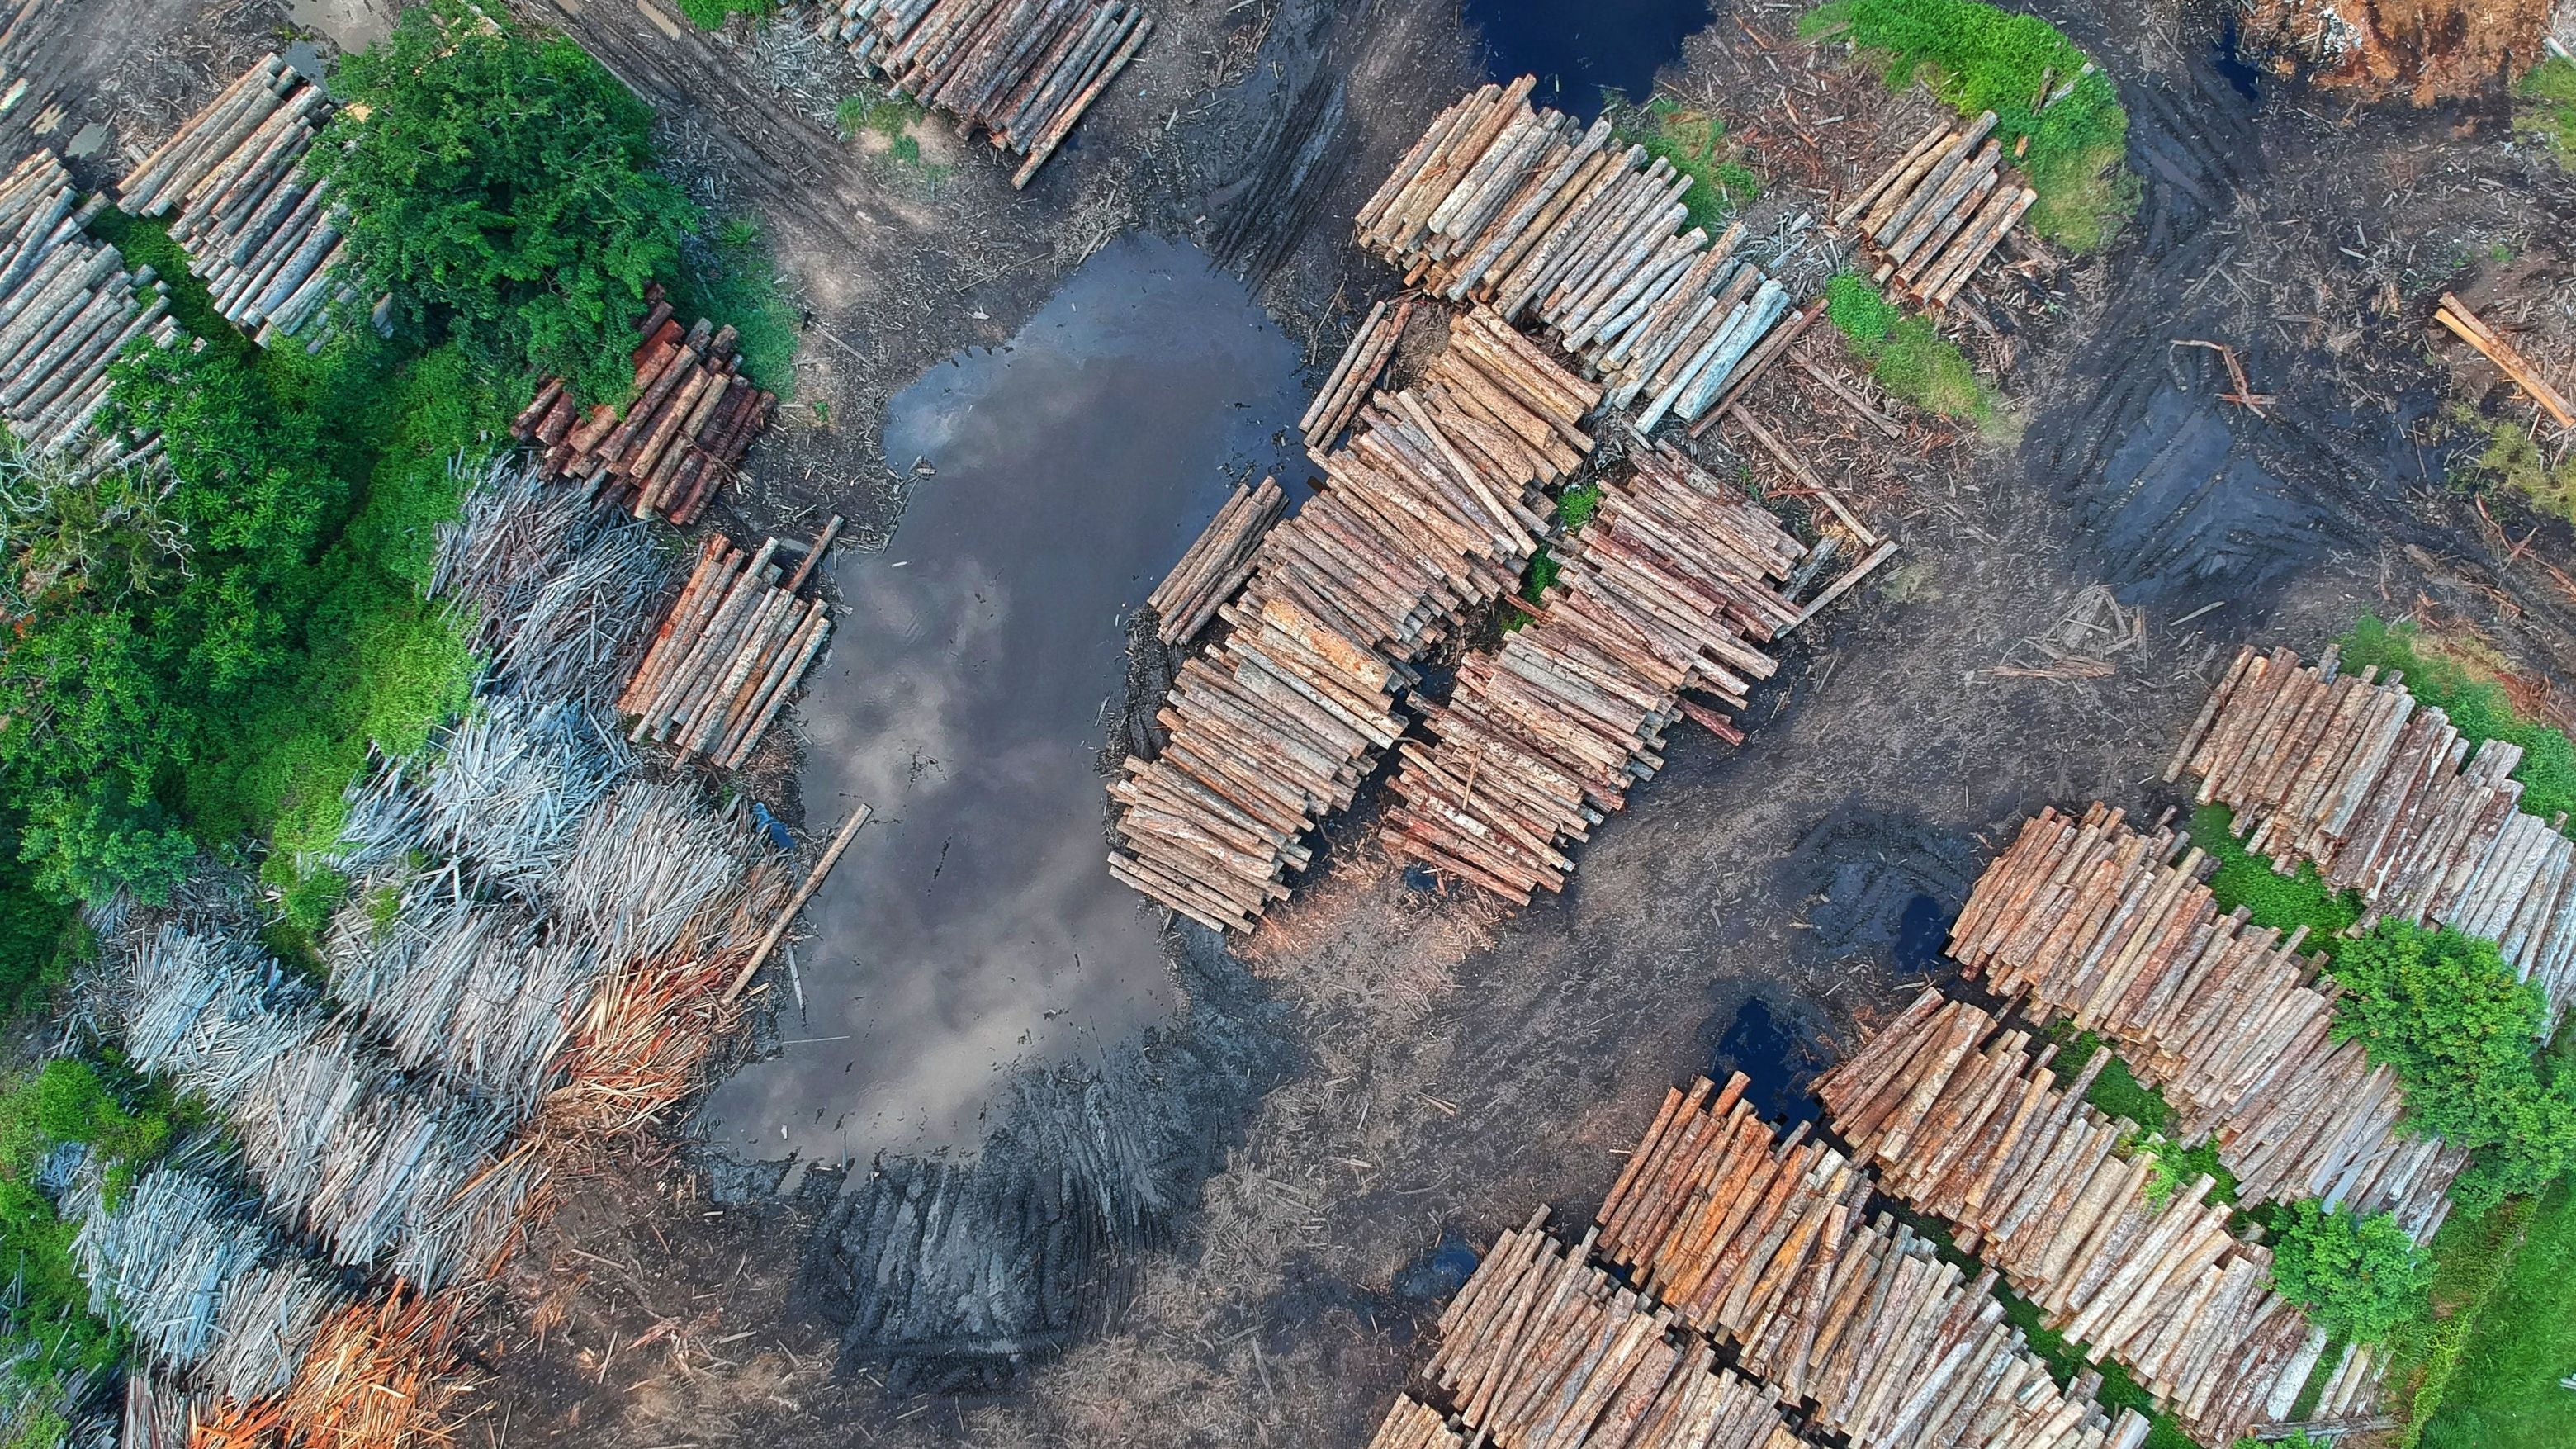 8 Impactful Ways to Stop Deforestation & Safeguard Our Forests – ecoHiny